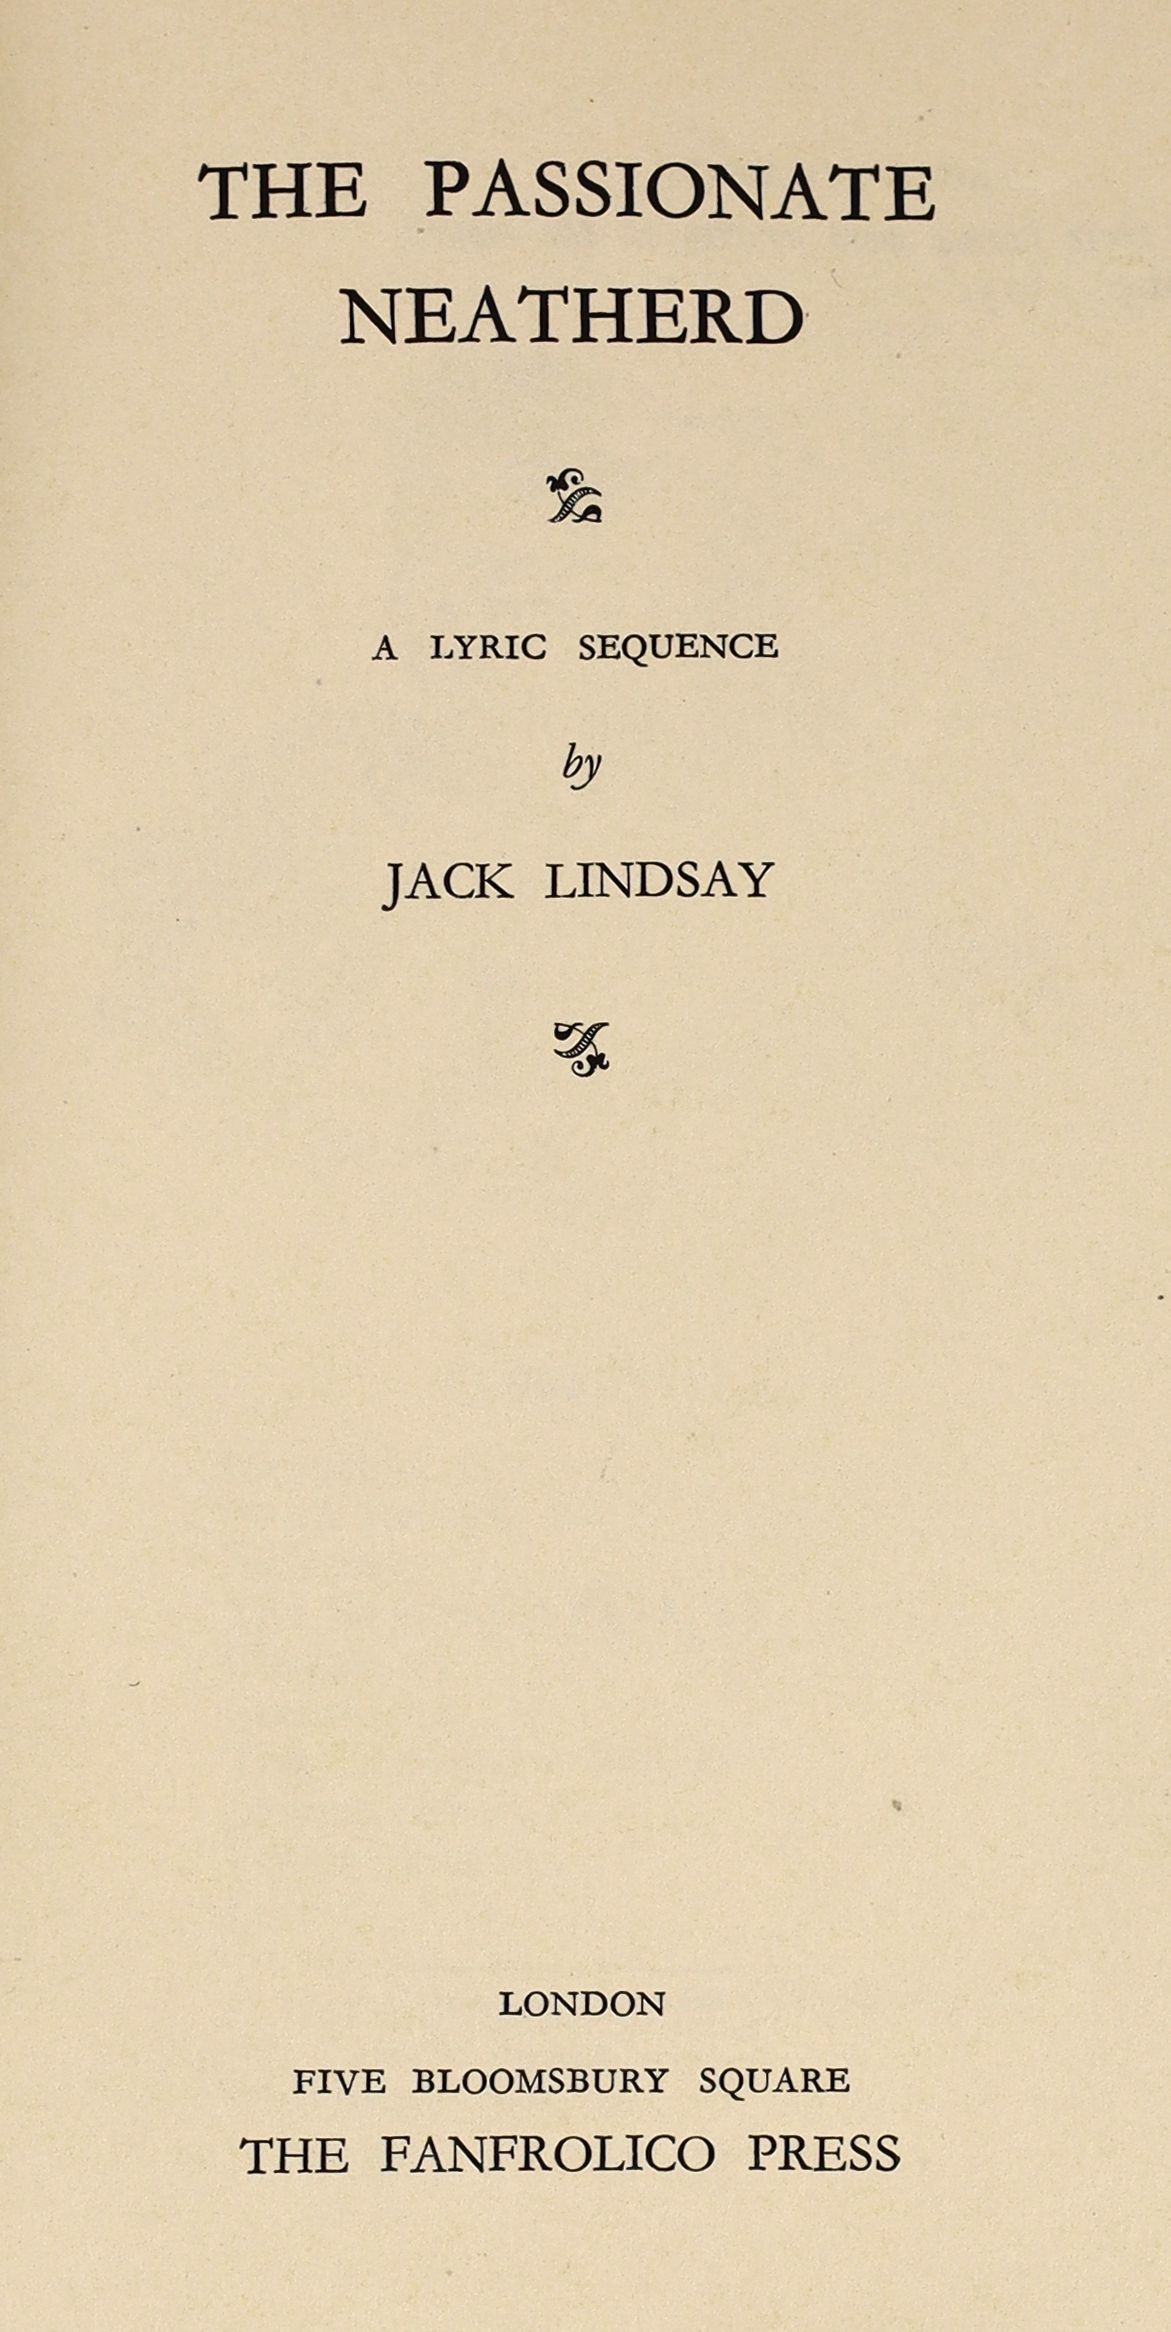 Lindsay, Jack - The Passionate Neatherd a Lyric Sequence, number 5 of 50 signed copies on japan vellum, 4to, illustrated by Norman Lindsay, The Franfrolic Press, London, [1926]